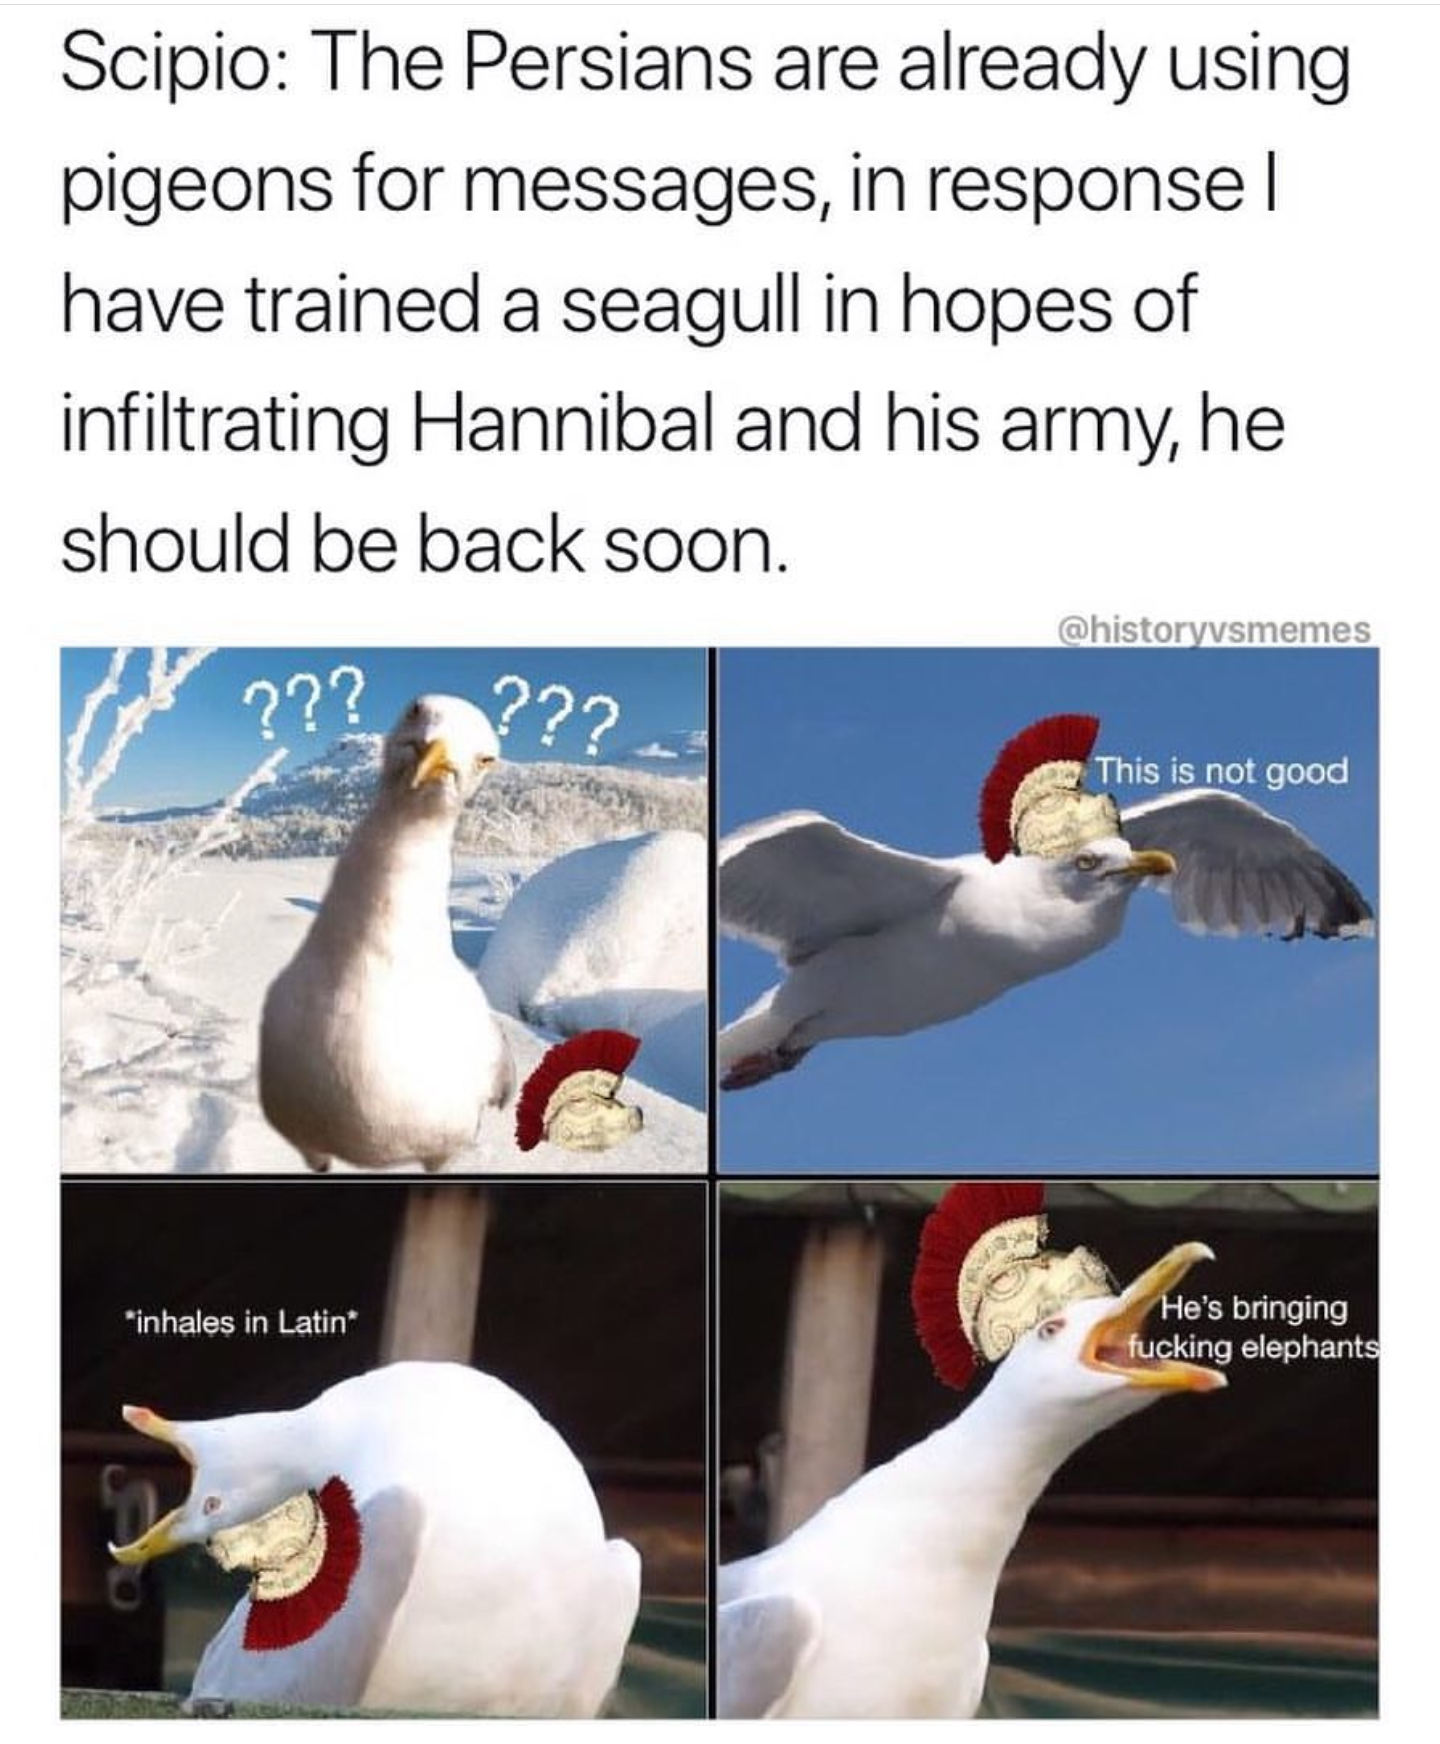 seagull flying - Scipio The Persians are already using pigeons for messages, in responsel have trained a seagull in hopes of infiltrating Hannibal and his army, he should be back soon. 2?? ?22 This is not good "inhales in Latin He's bringing fucking eleph